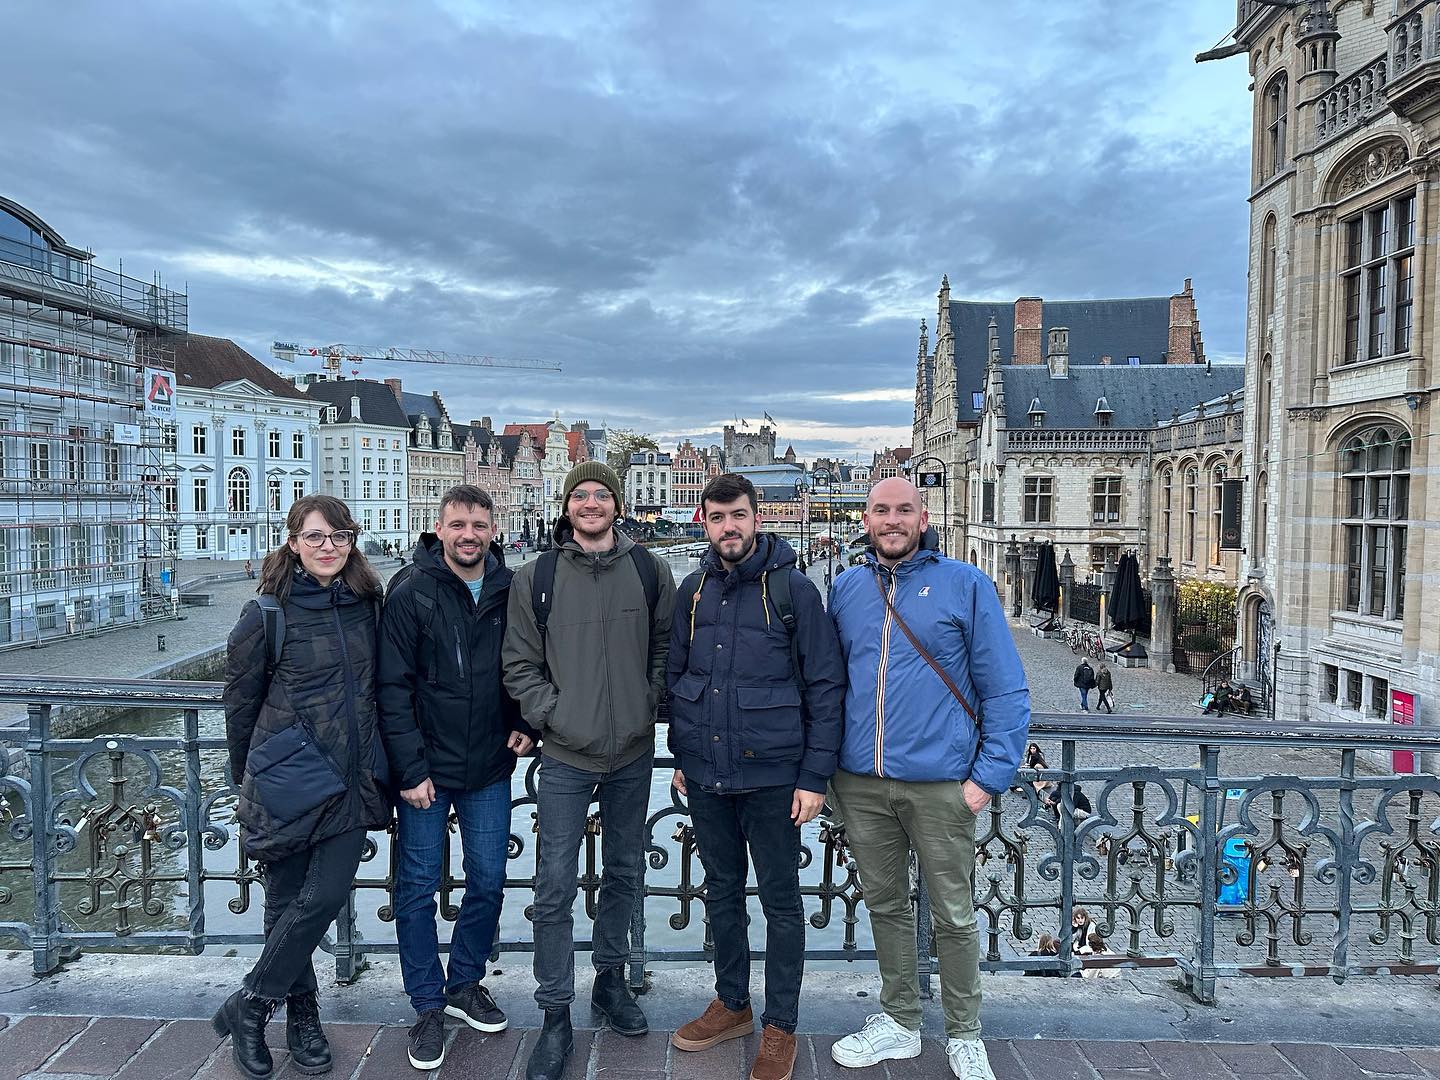 Intense working meetings, long walks &amp; spending time with the team. The recipe for a perfect business trip. ☀️
__
#strongertogether #beautifulghent #businesstrip